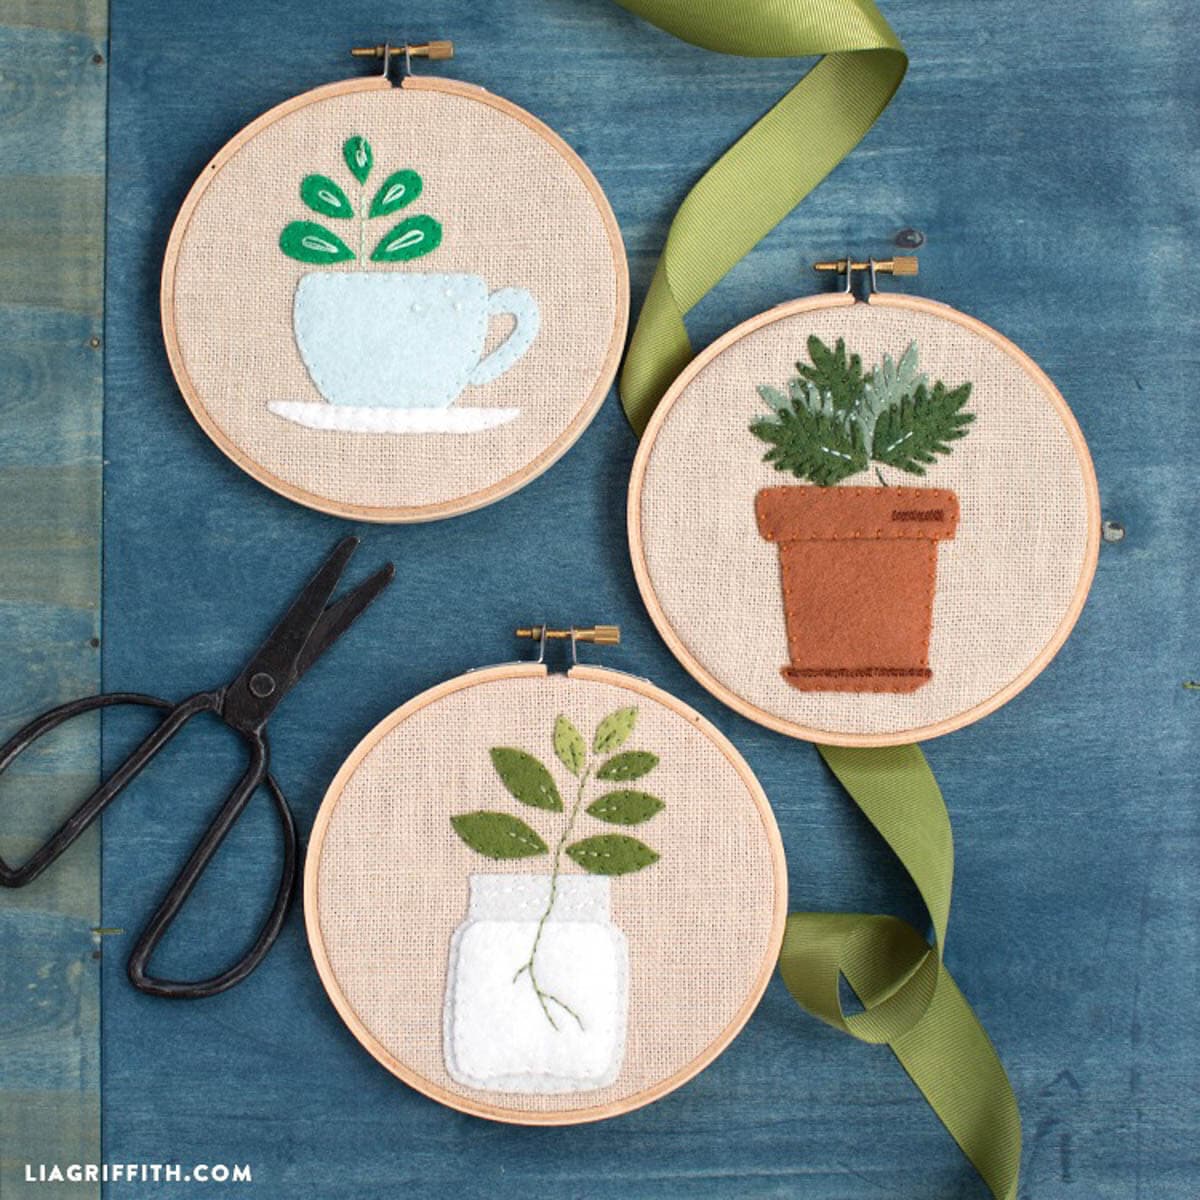 Three DIY embroidery hoops with plants pictured in felt